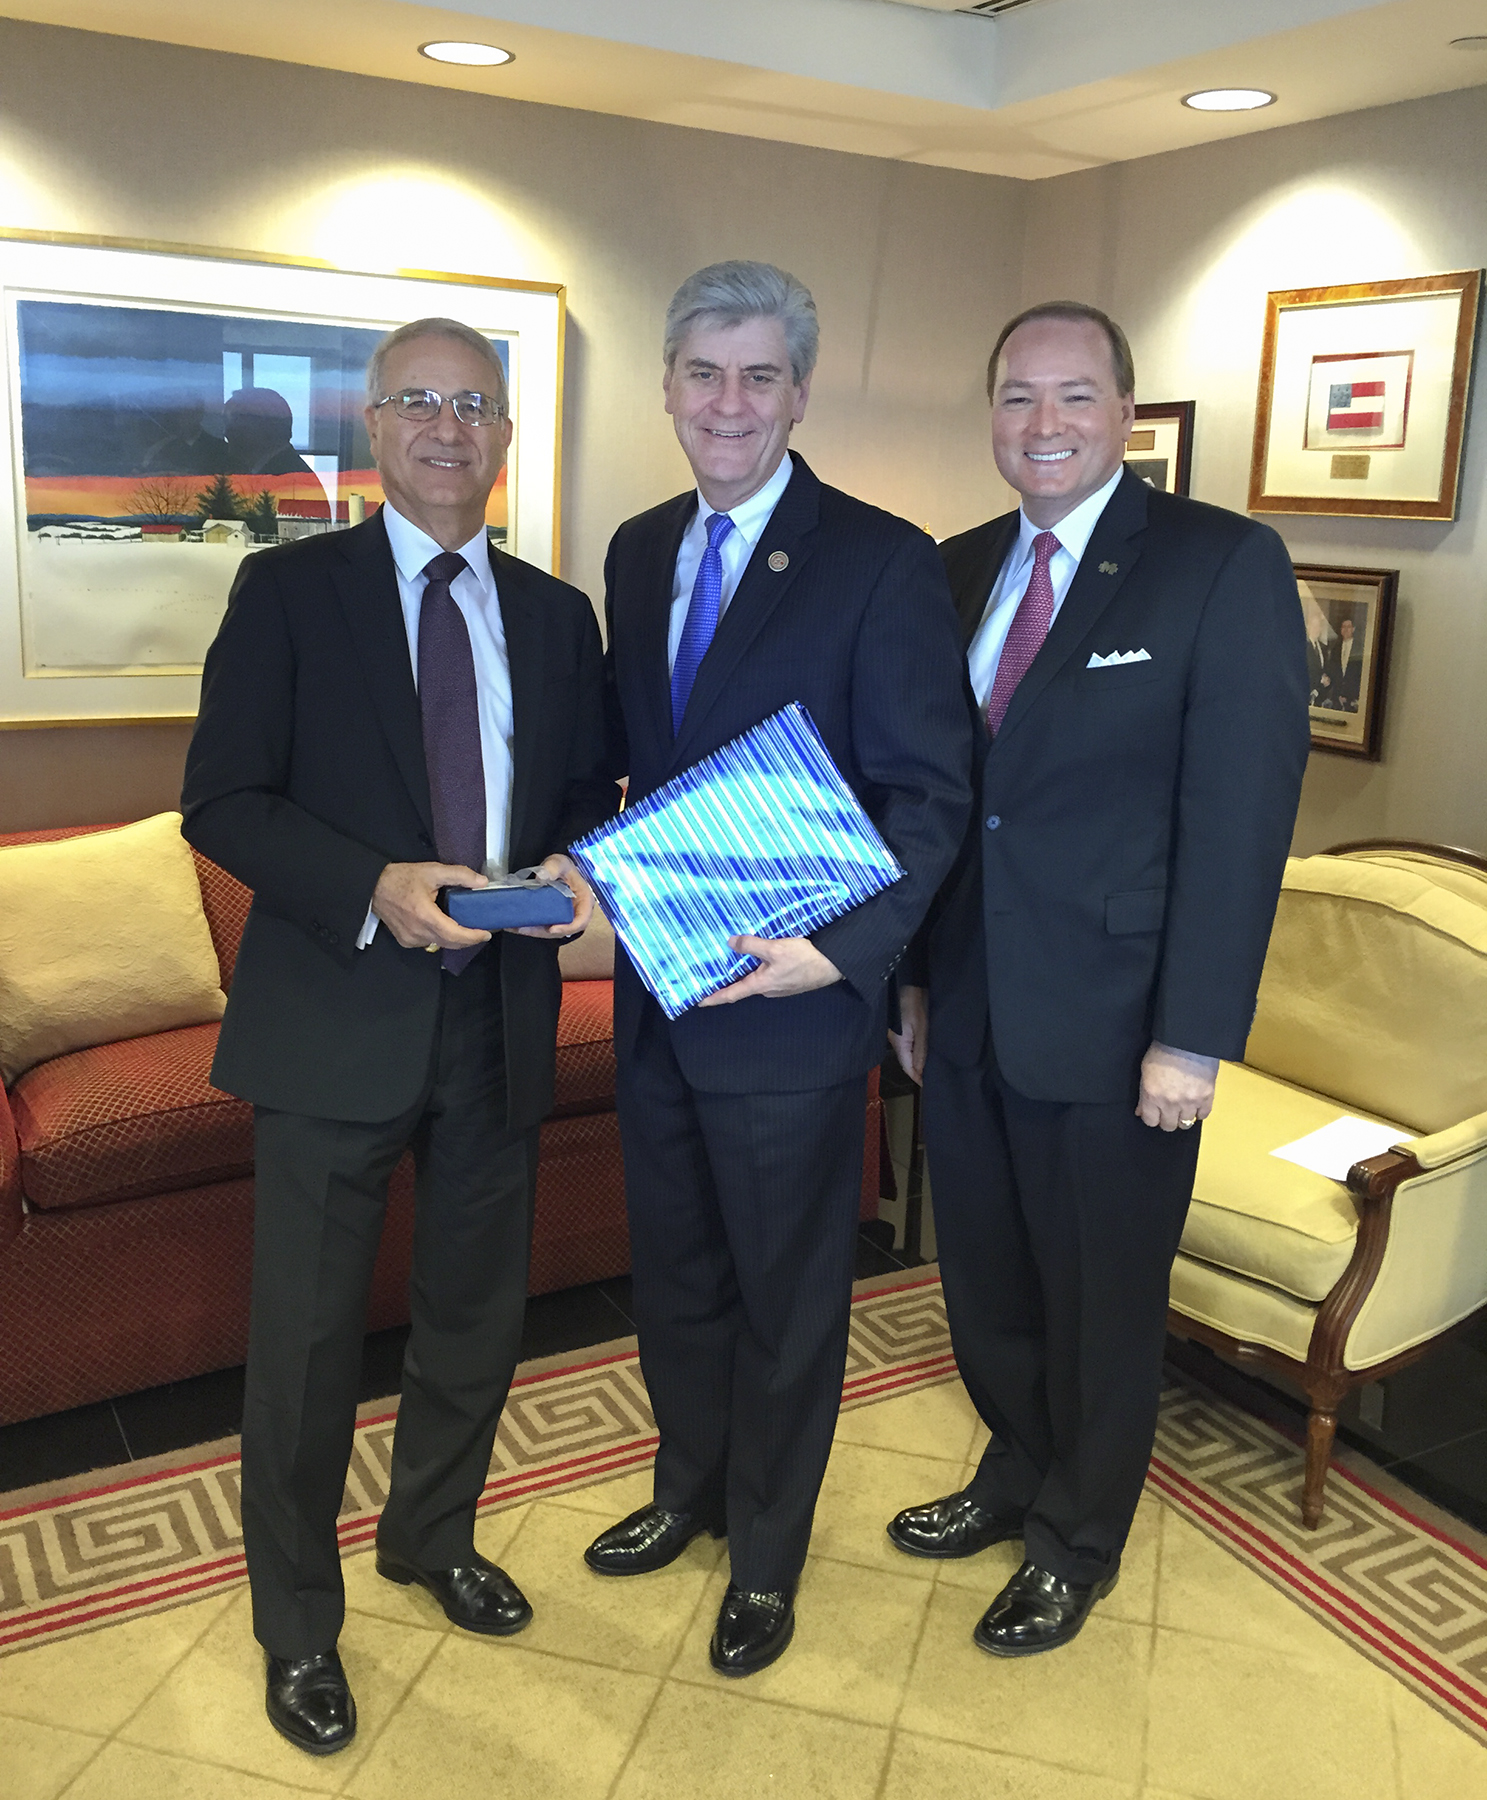 Moroccan Ambassador Rachad Bouhlal (l-r), Gov. Phil Bryant and Mississippi State University President Mark E. Keenum met in Jackson on Wednesday [Jan 21.] The International Institute at MSU sponsored the ambassador's trip to Mississippi.